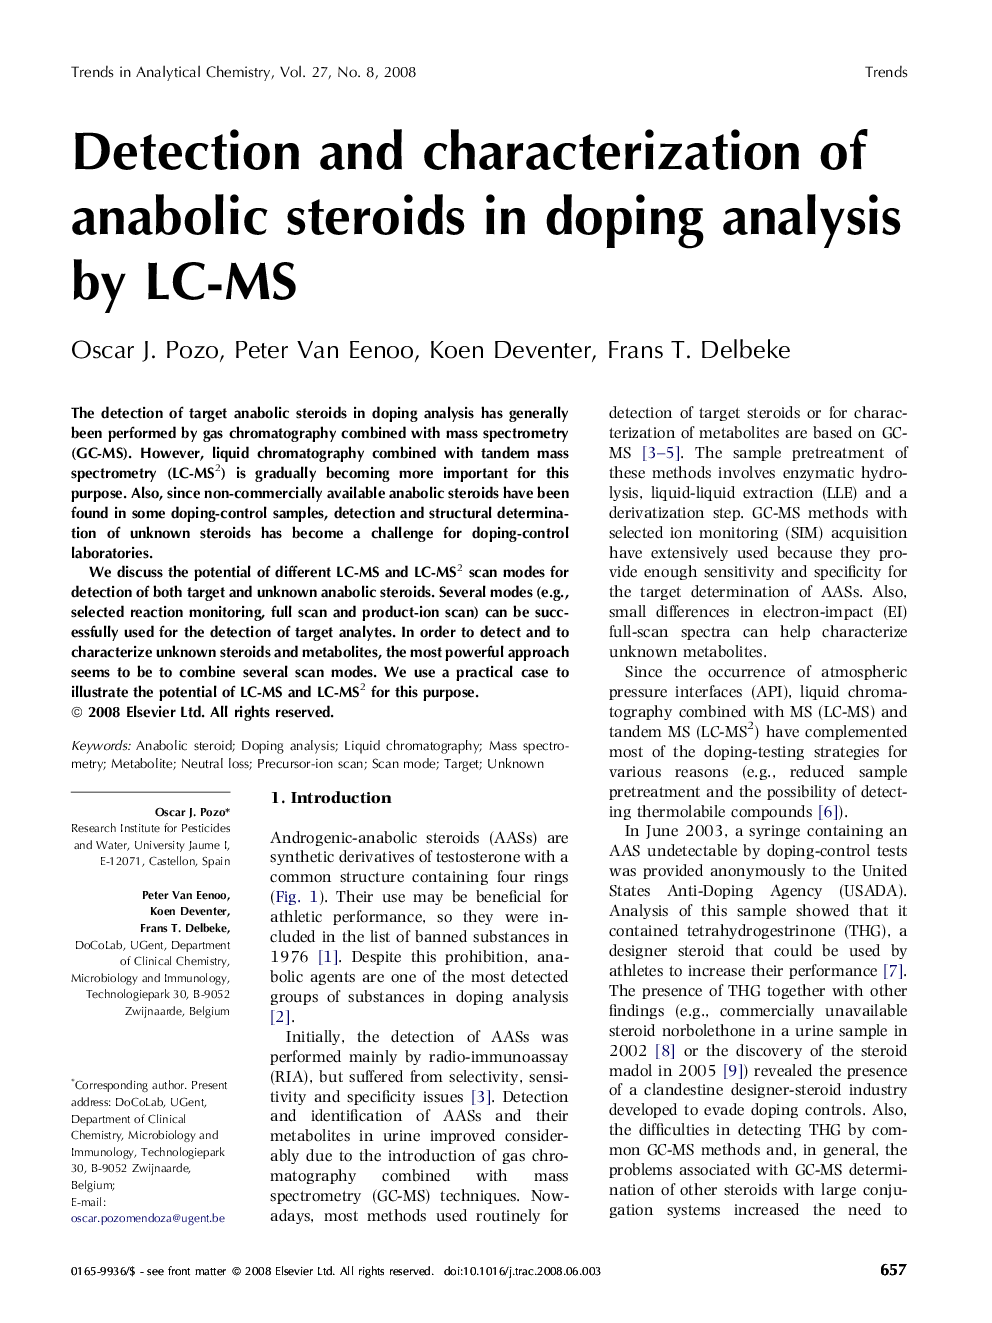 Detection and characterization of anabolic steroids in doping analysis by LC-MS